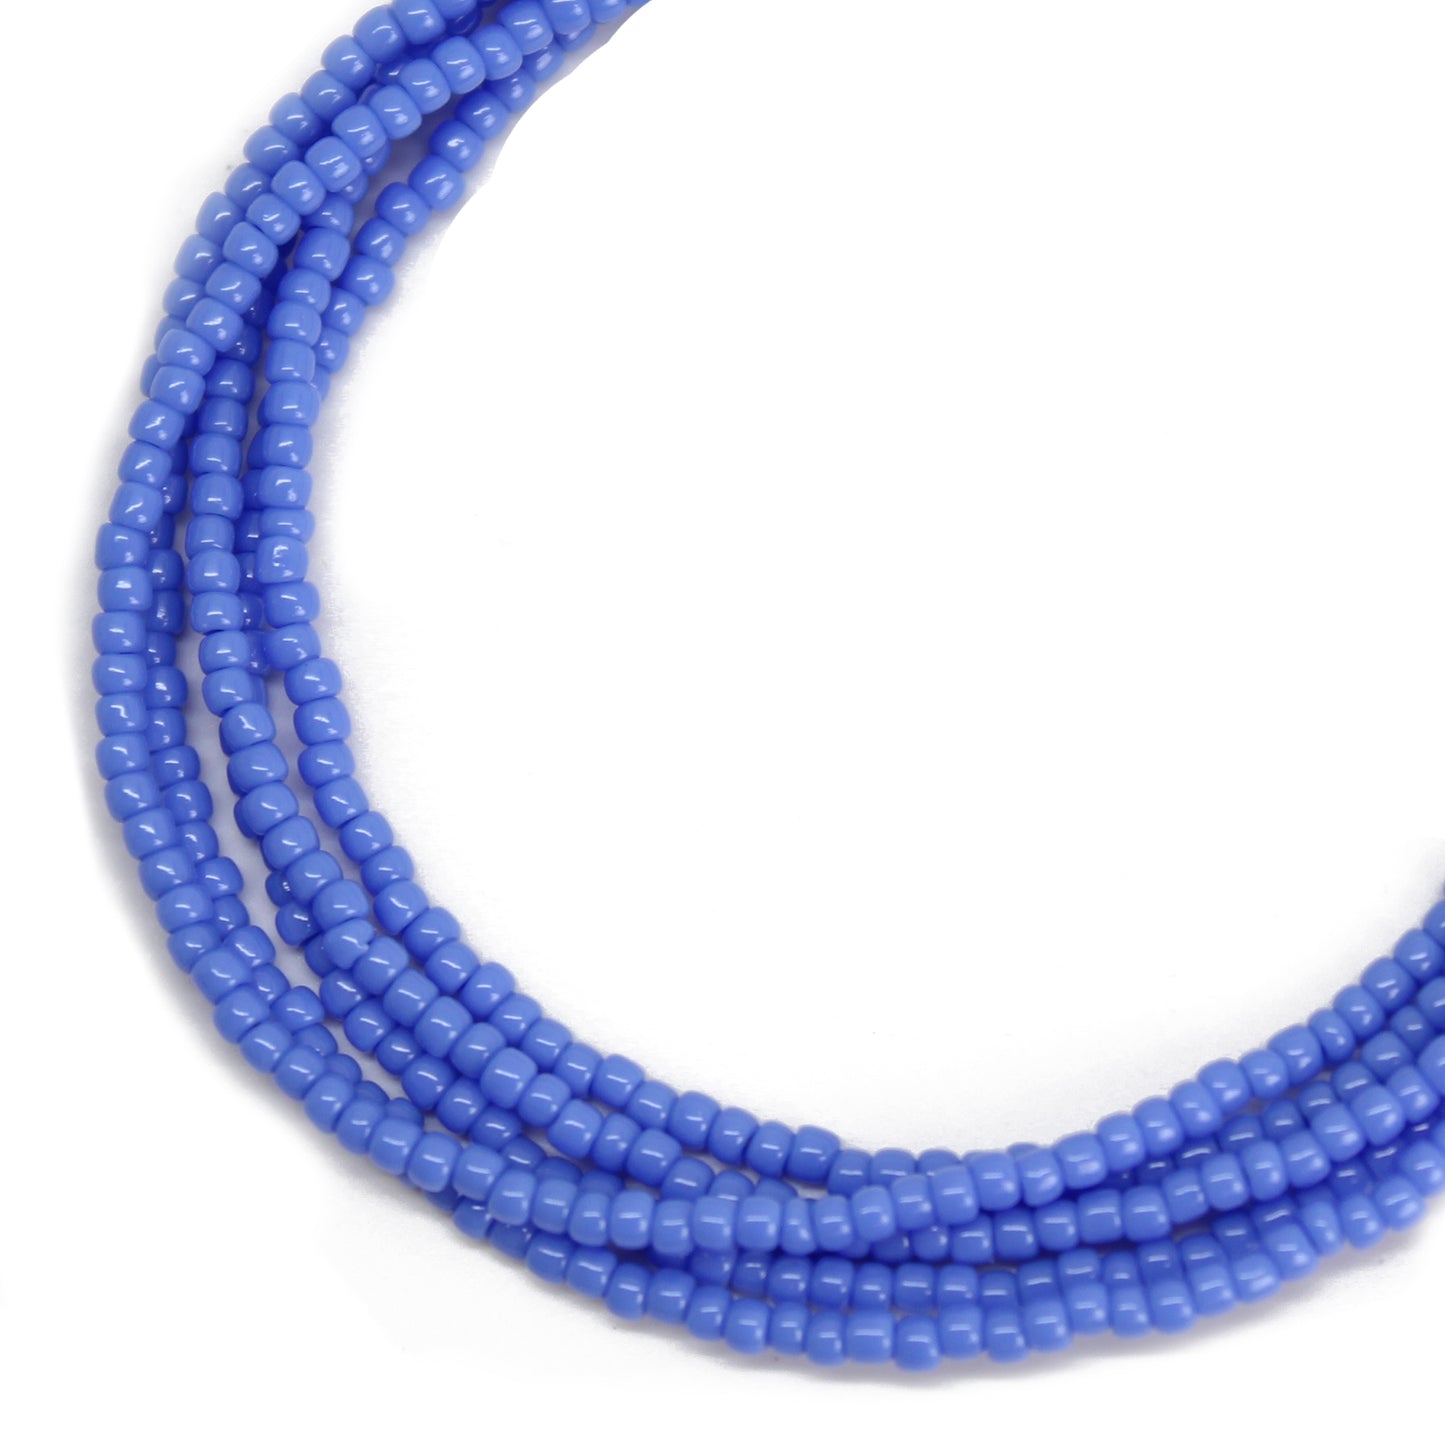 Blue Beaded Necklace - Buy Blue Beaded Necklace online in India